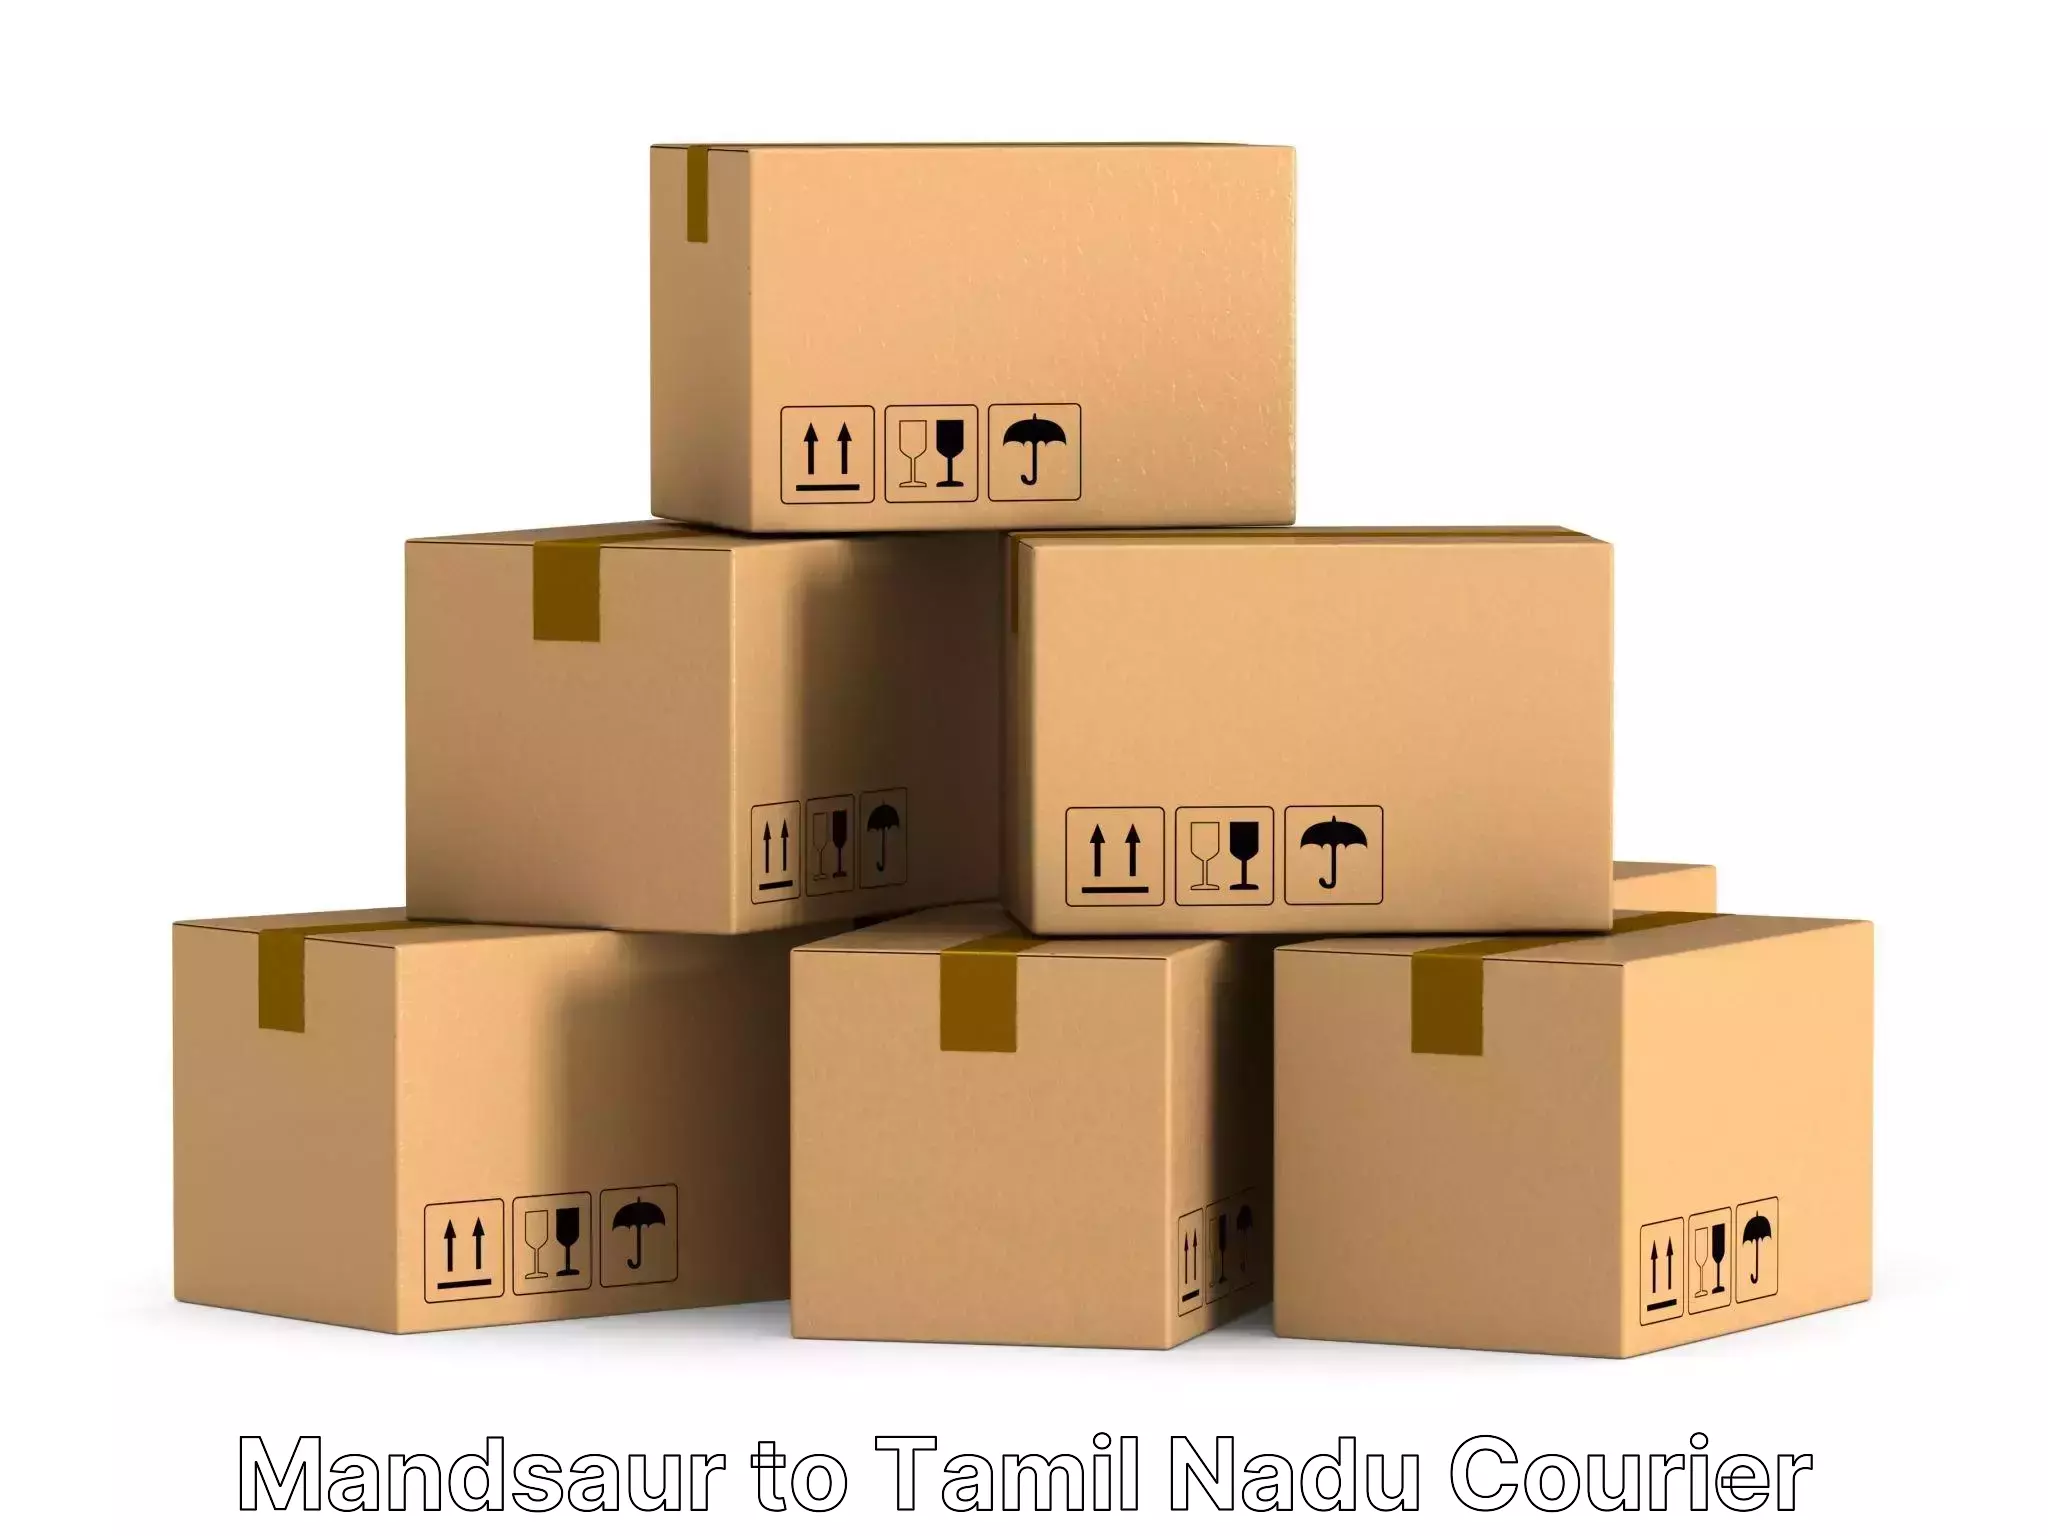 Moving and handling services in Mandsaur to Ennore Port Chennai